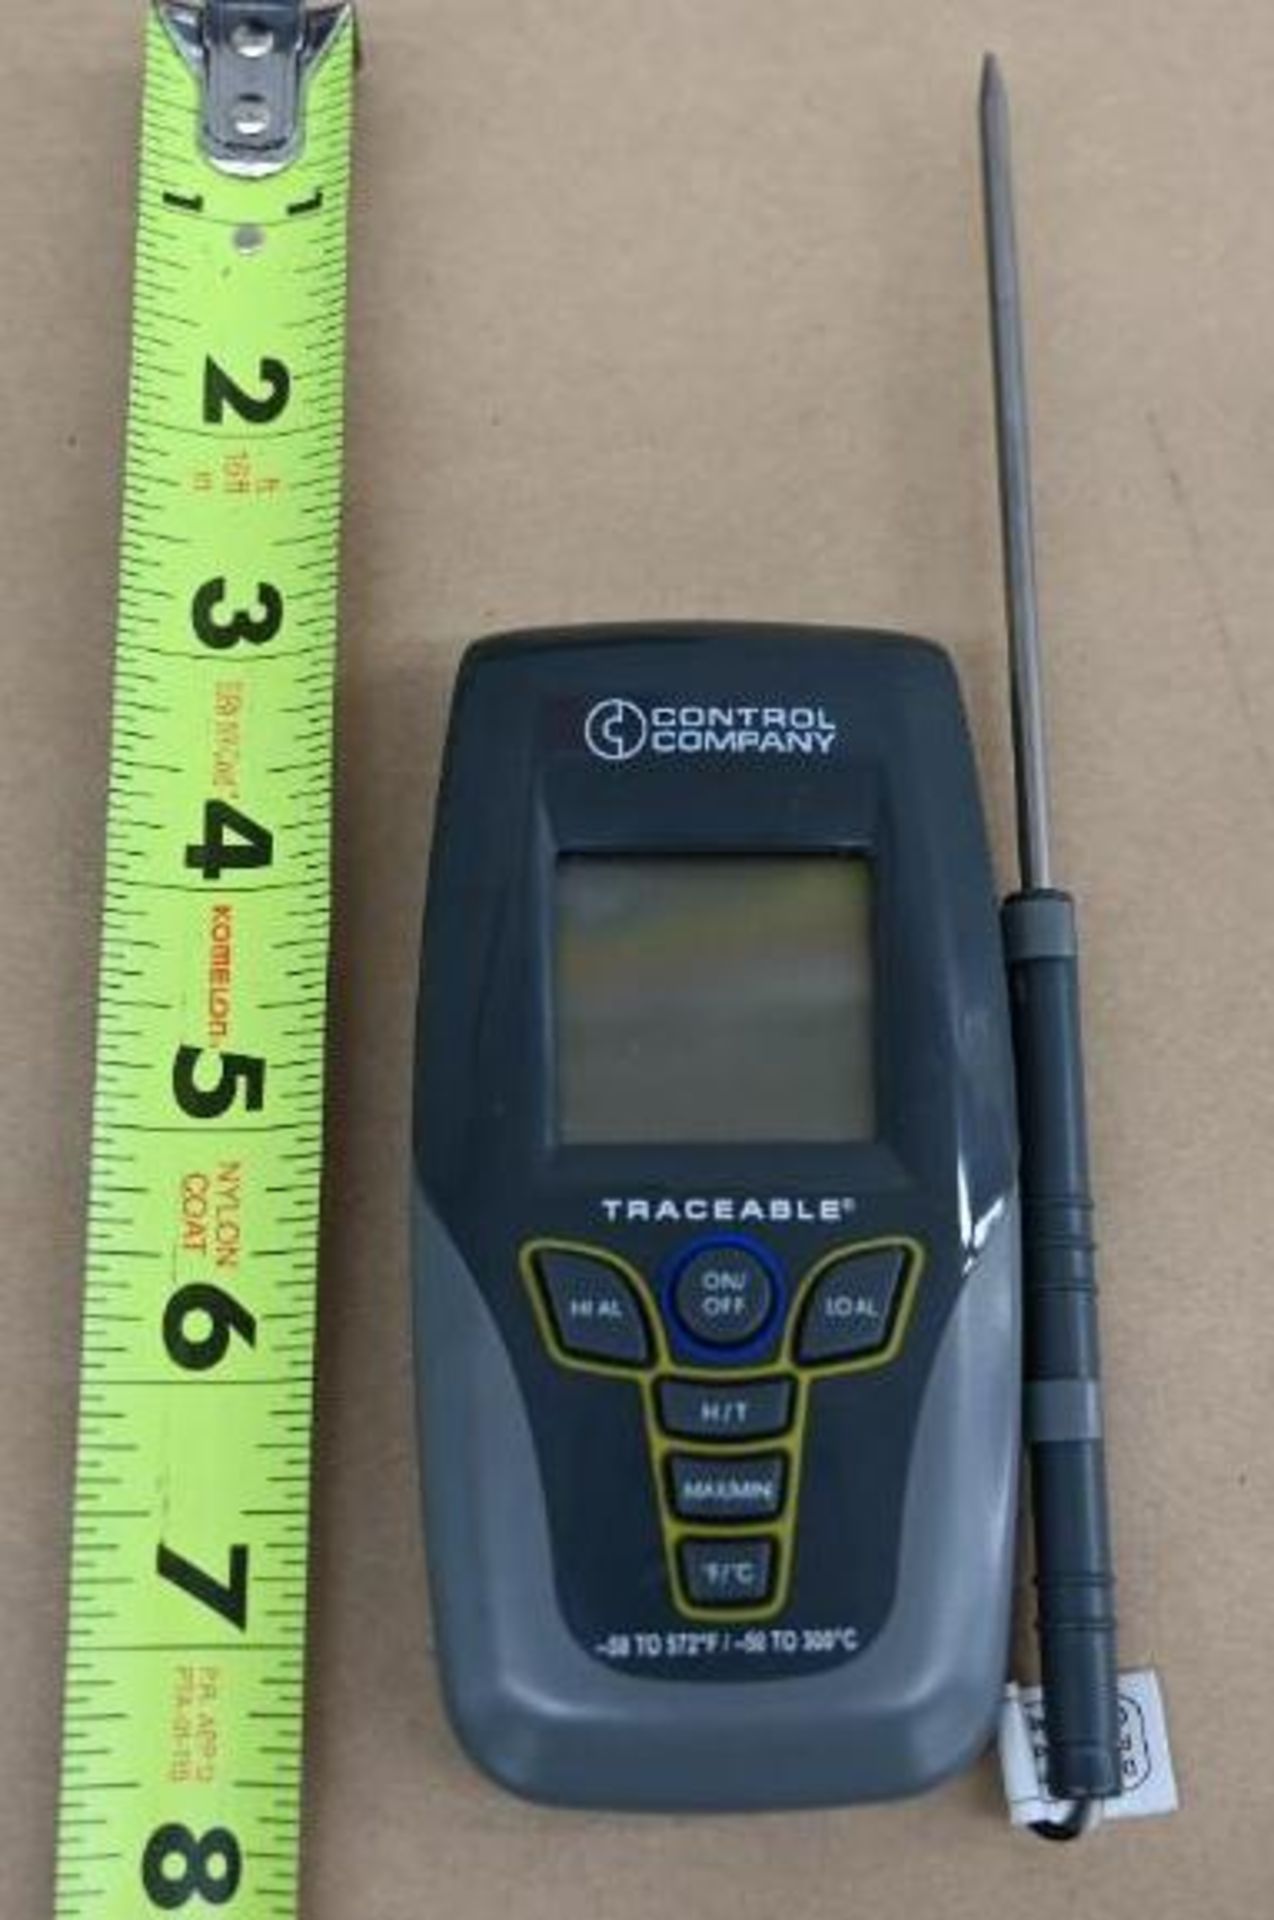 Control Company Traceable Thermometer - Image 3 of 6